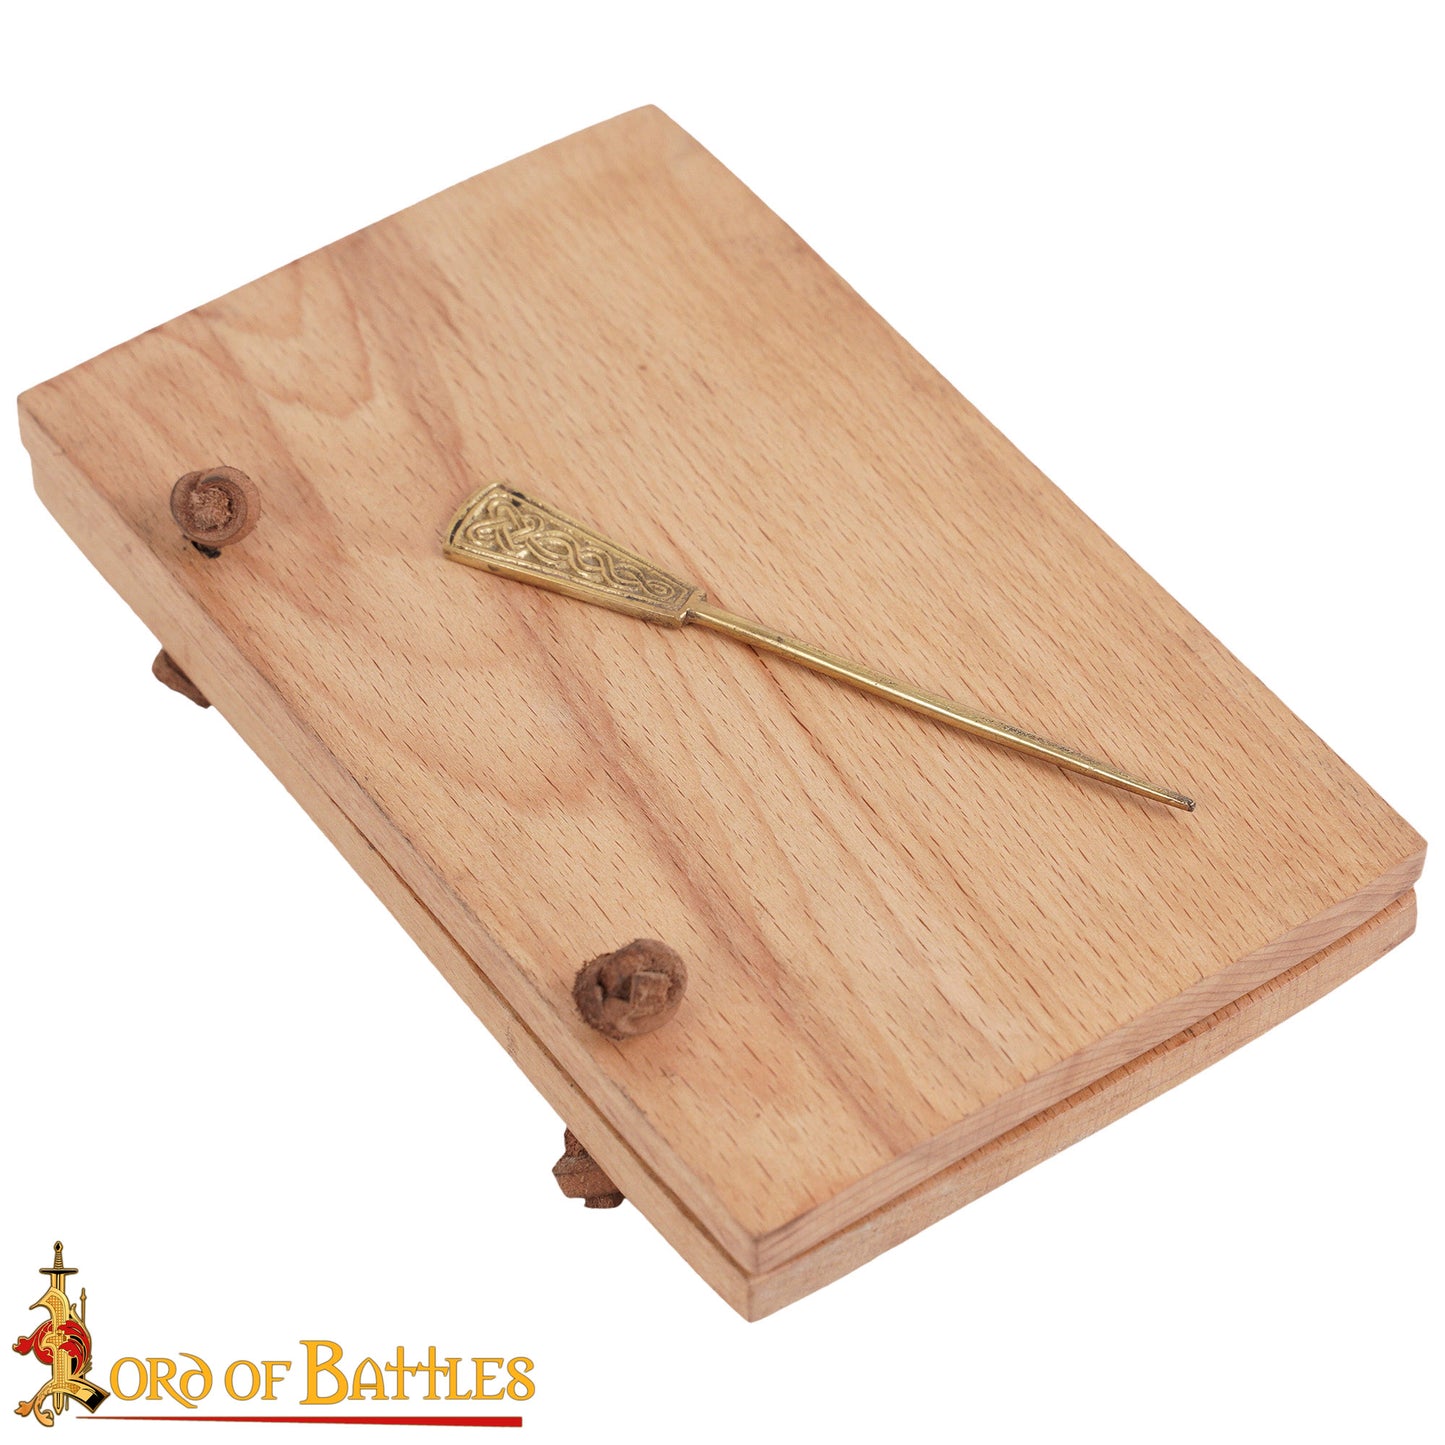 Wax Writing Tablet with an Anglo Saxon Stylus